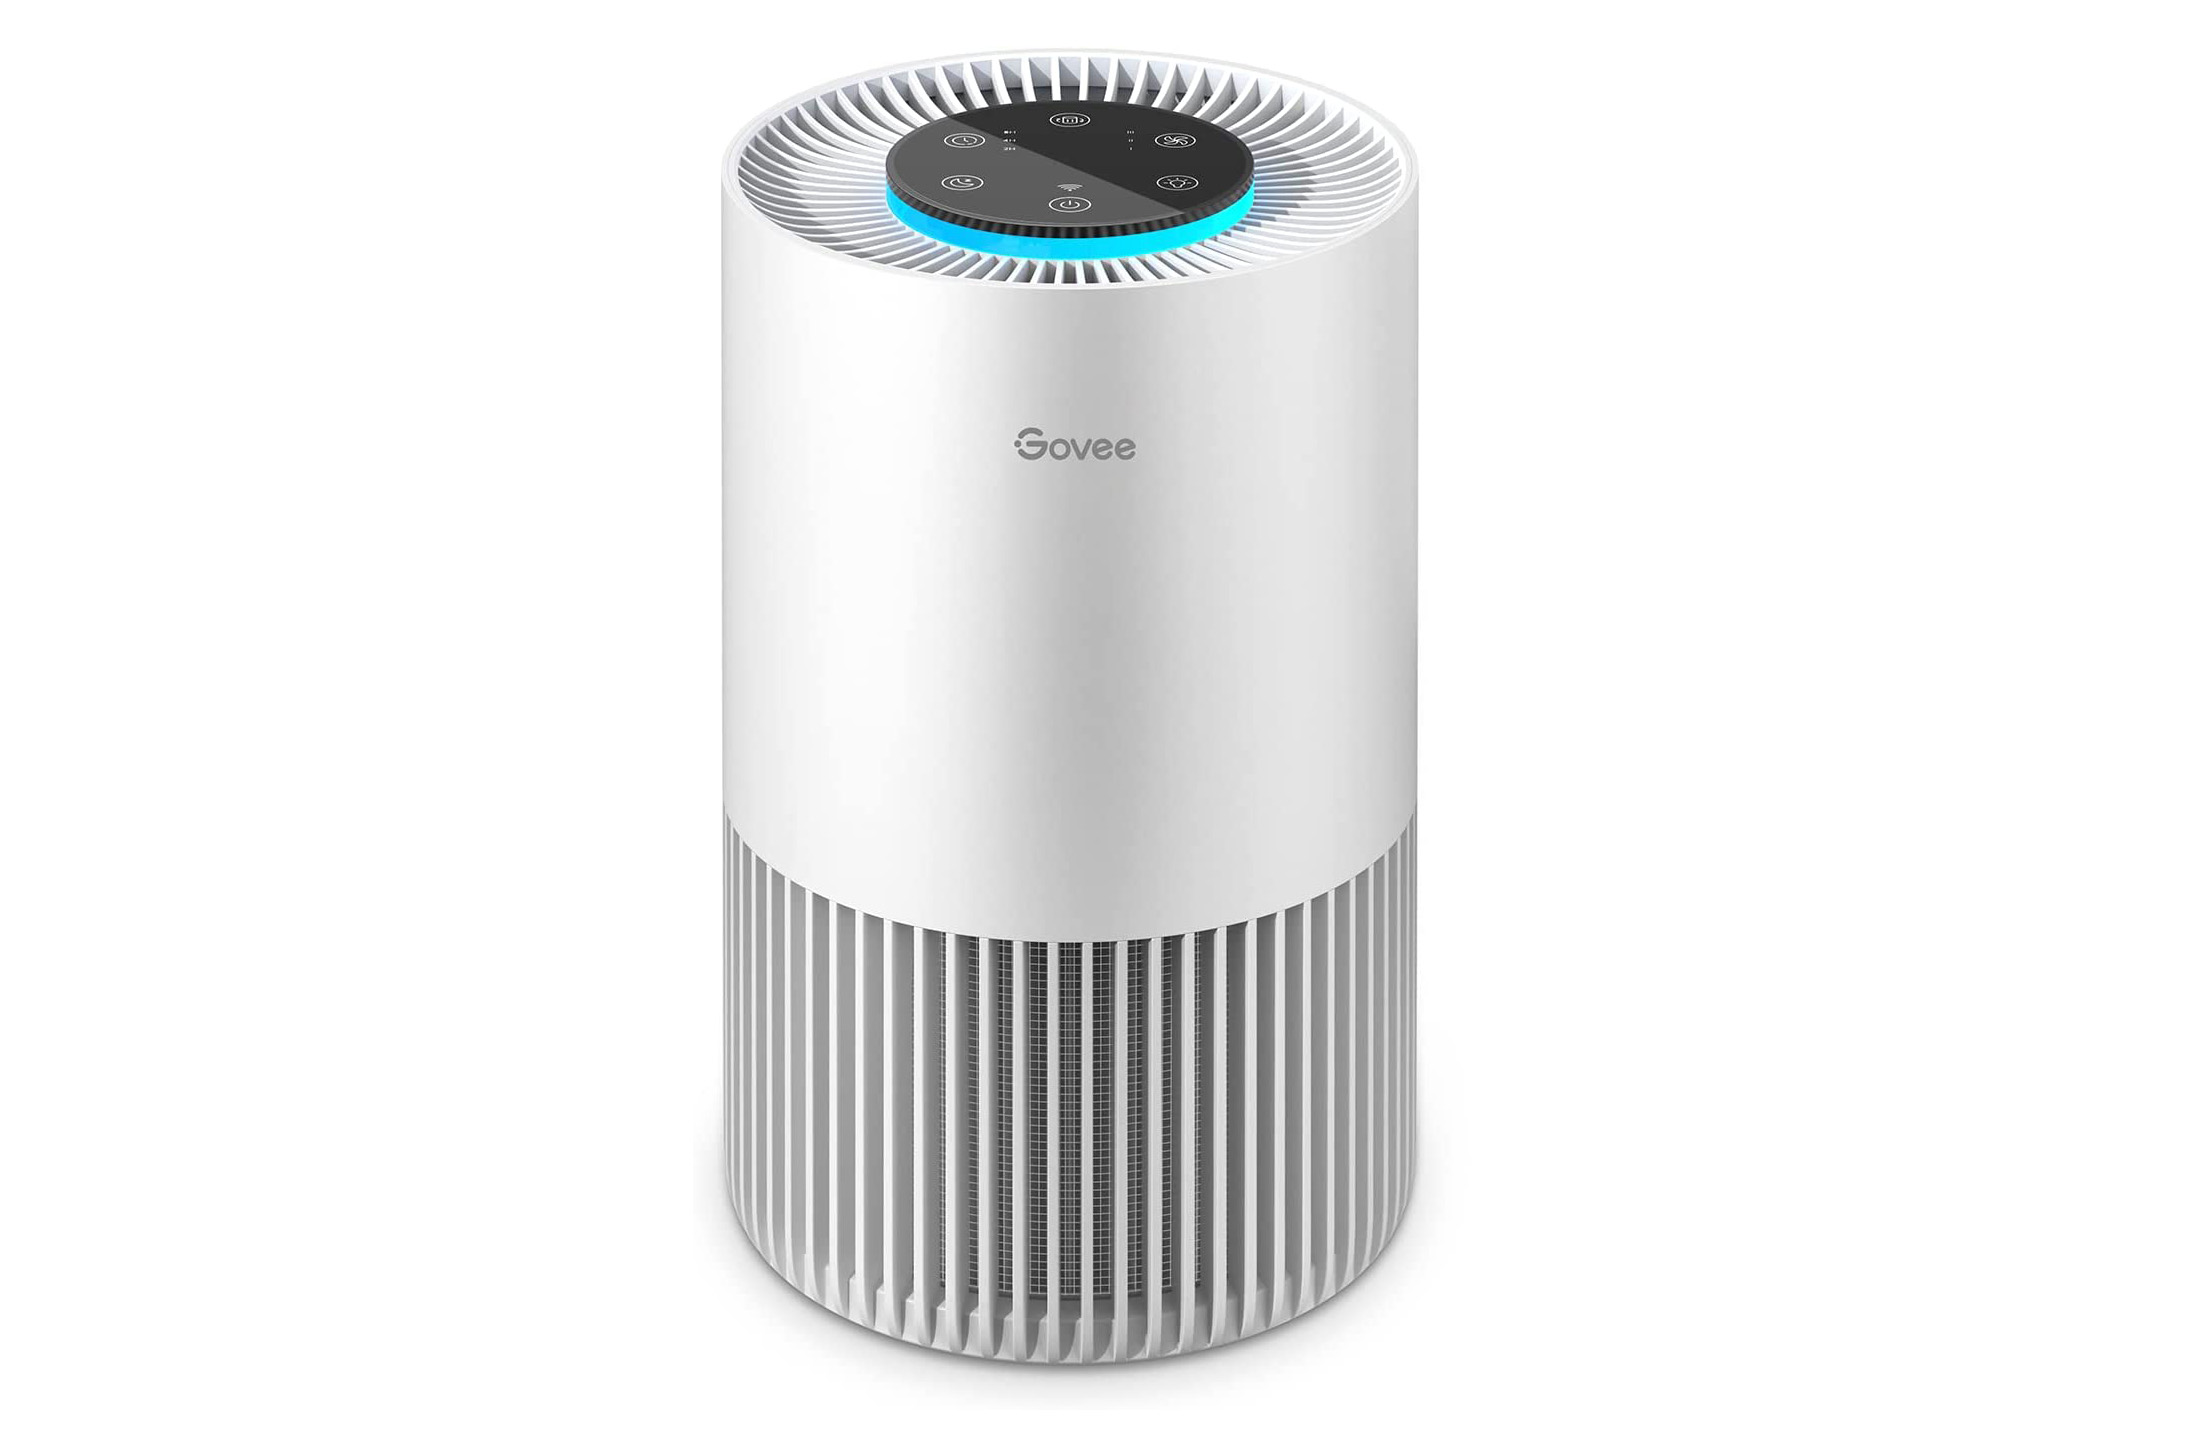 Govee Smart Air Purifier (Model H7120): Ideal for Small Spaces